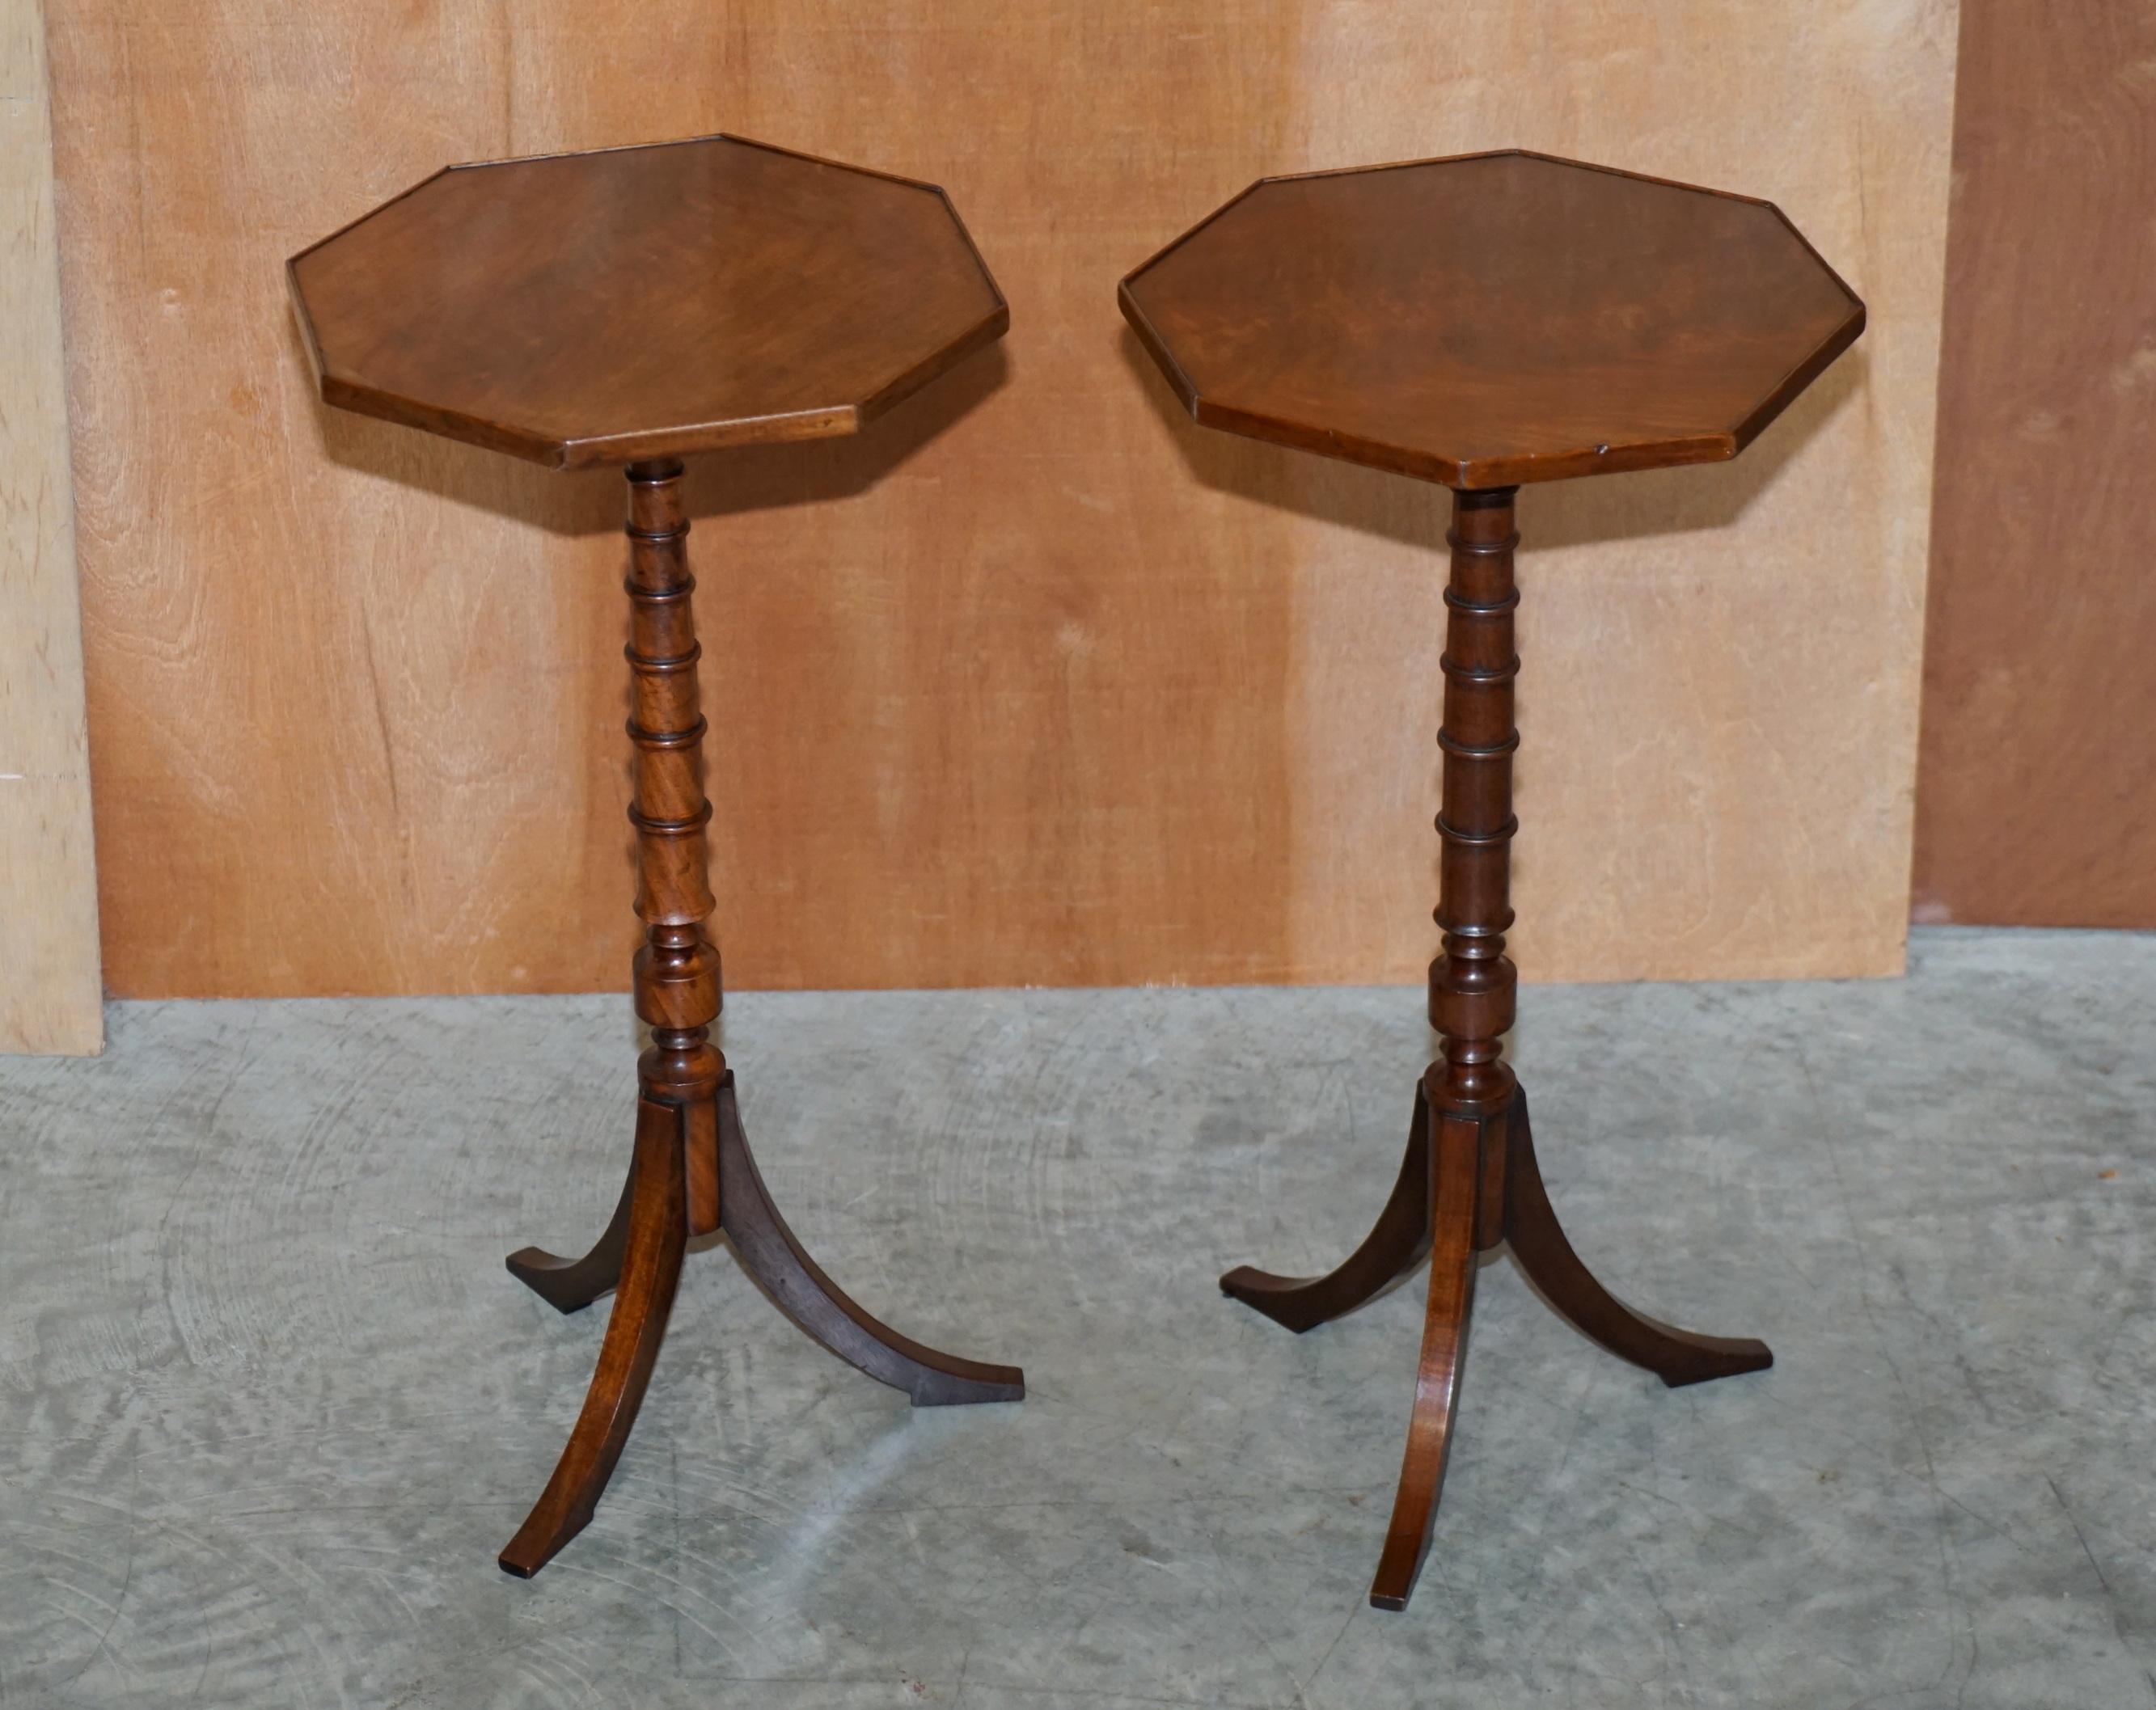 We are delighted to offer for sale this beautiful pair of original Victorian ring turned side tables in mahogany 

A very good looking and decorative pair with hand carved ring turned column bases, octagonal tops which have small lips and tripod